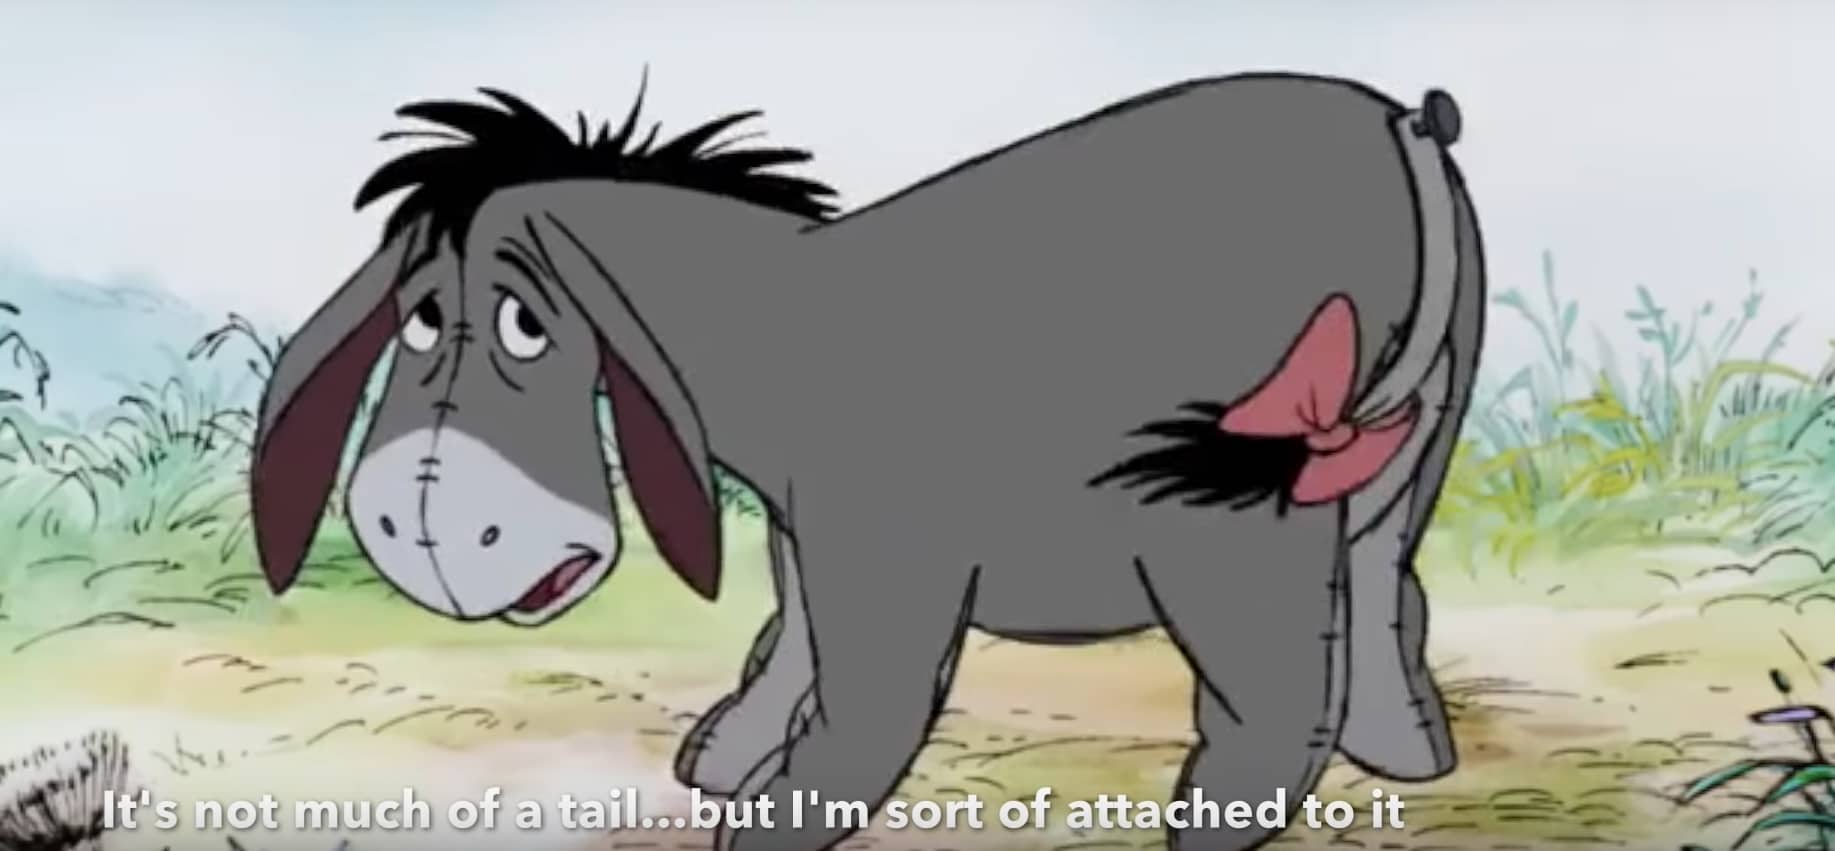 eeyore happiness comes form within